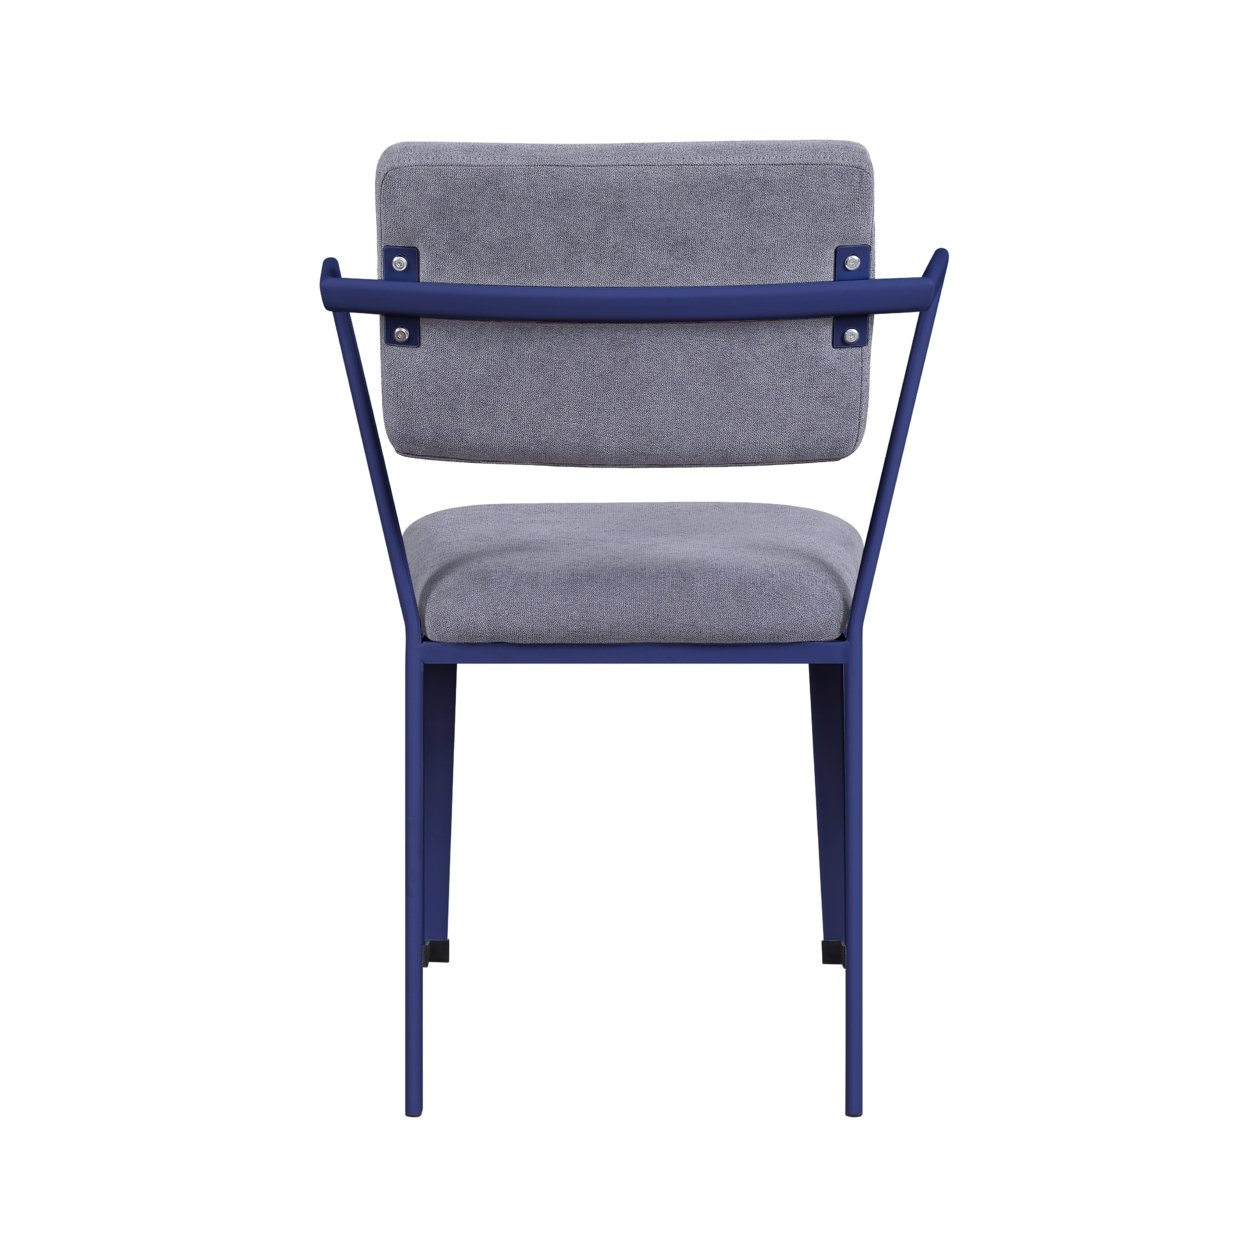 Fabric Upholstered Metal Base Chair With Flared Armrest, Blue And Gray- Saltoro Sherpi